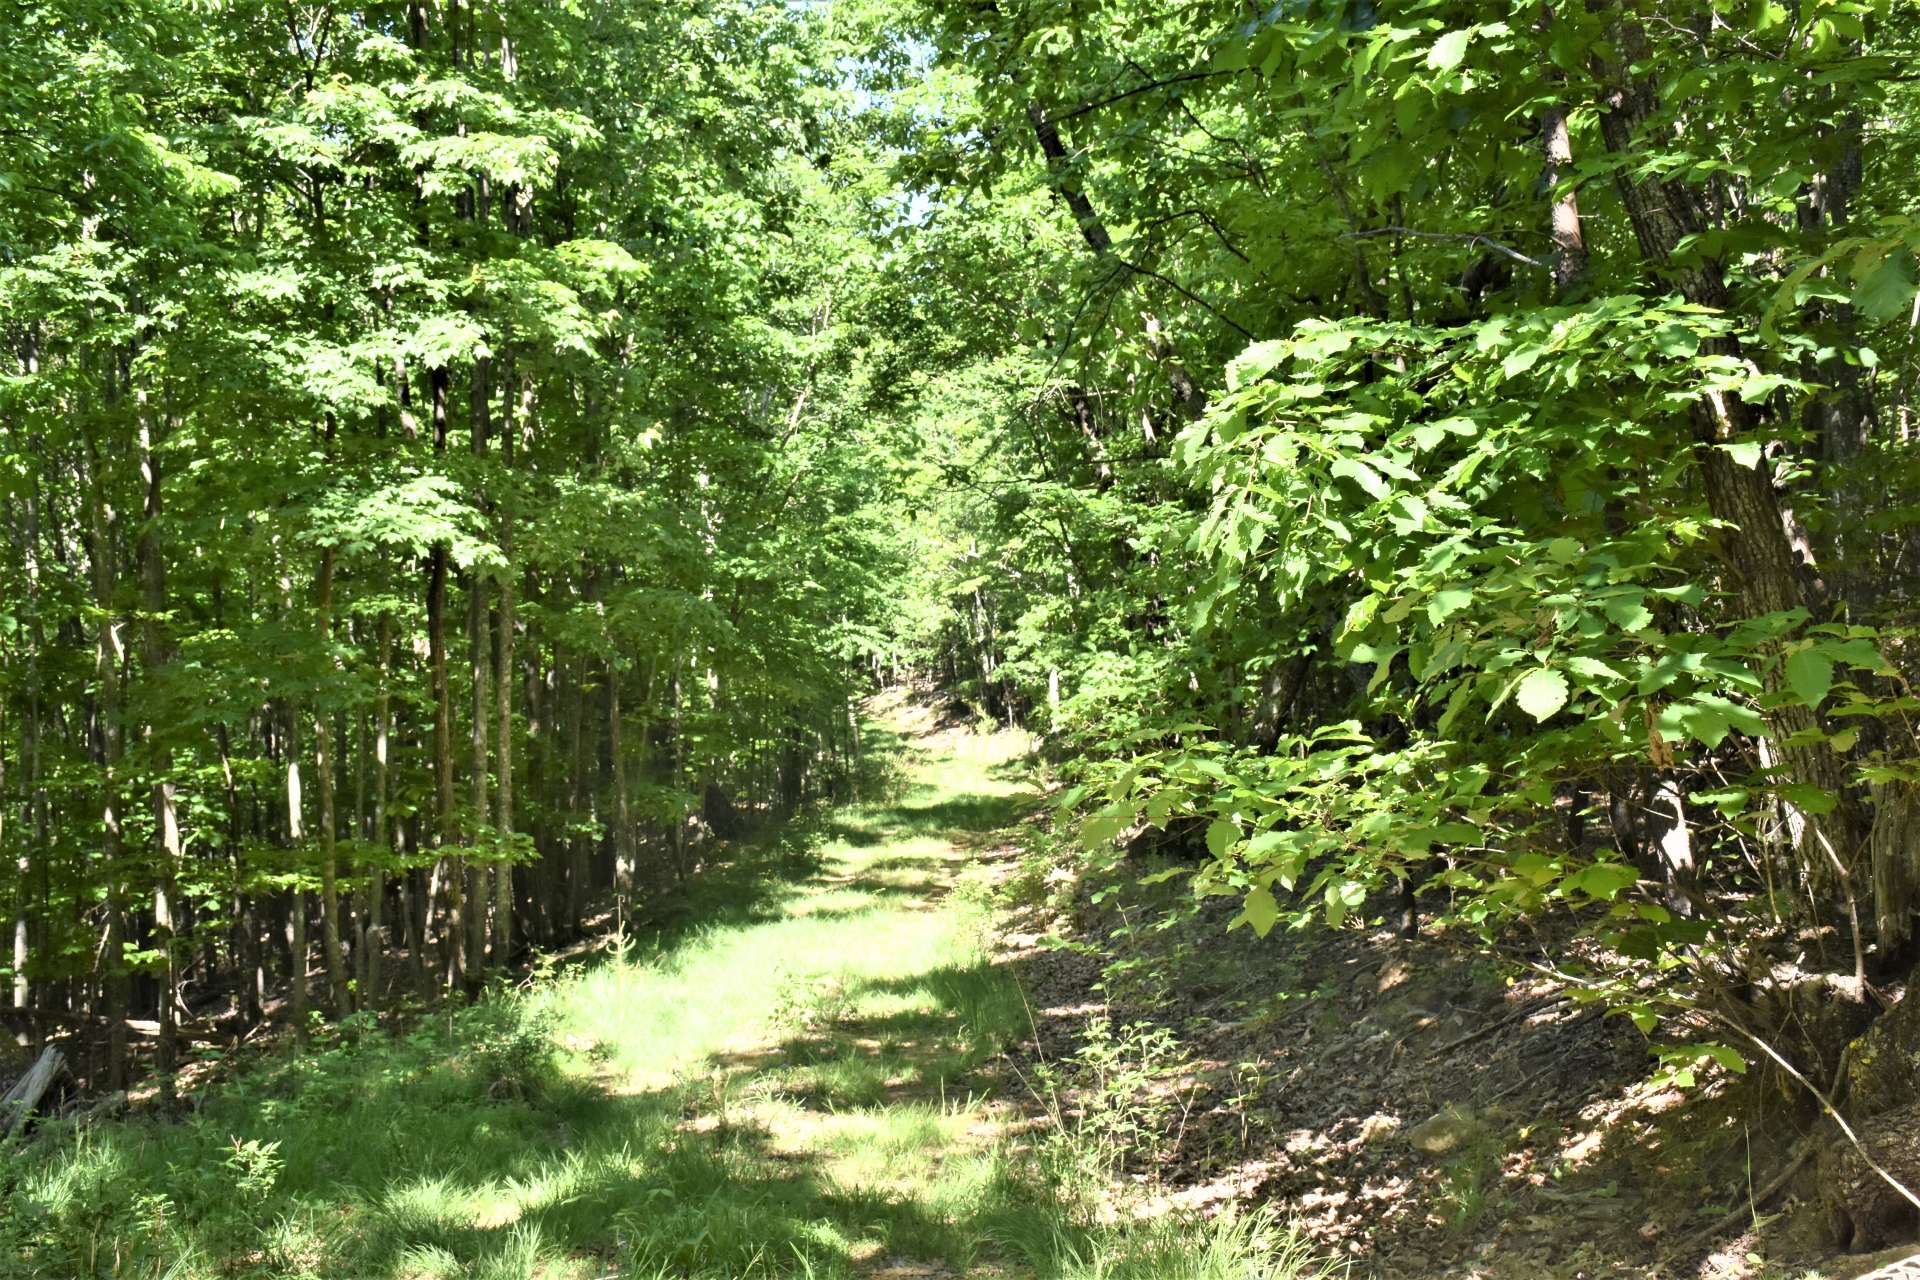 The terrain is mixed and offers a diverse mixture of native hardwoods, evergreens and mountain foliage.